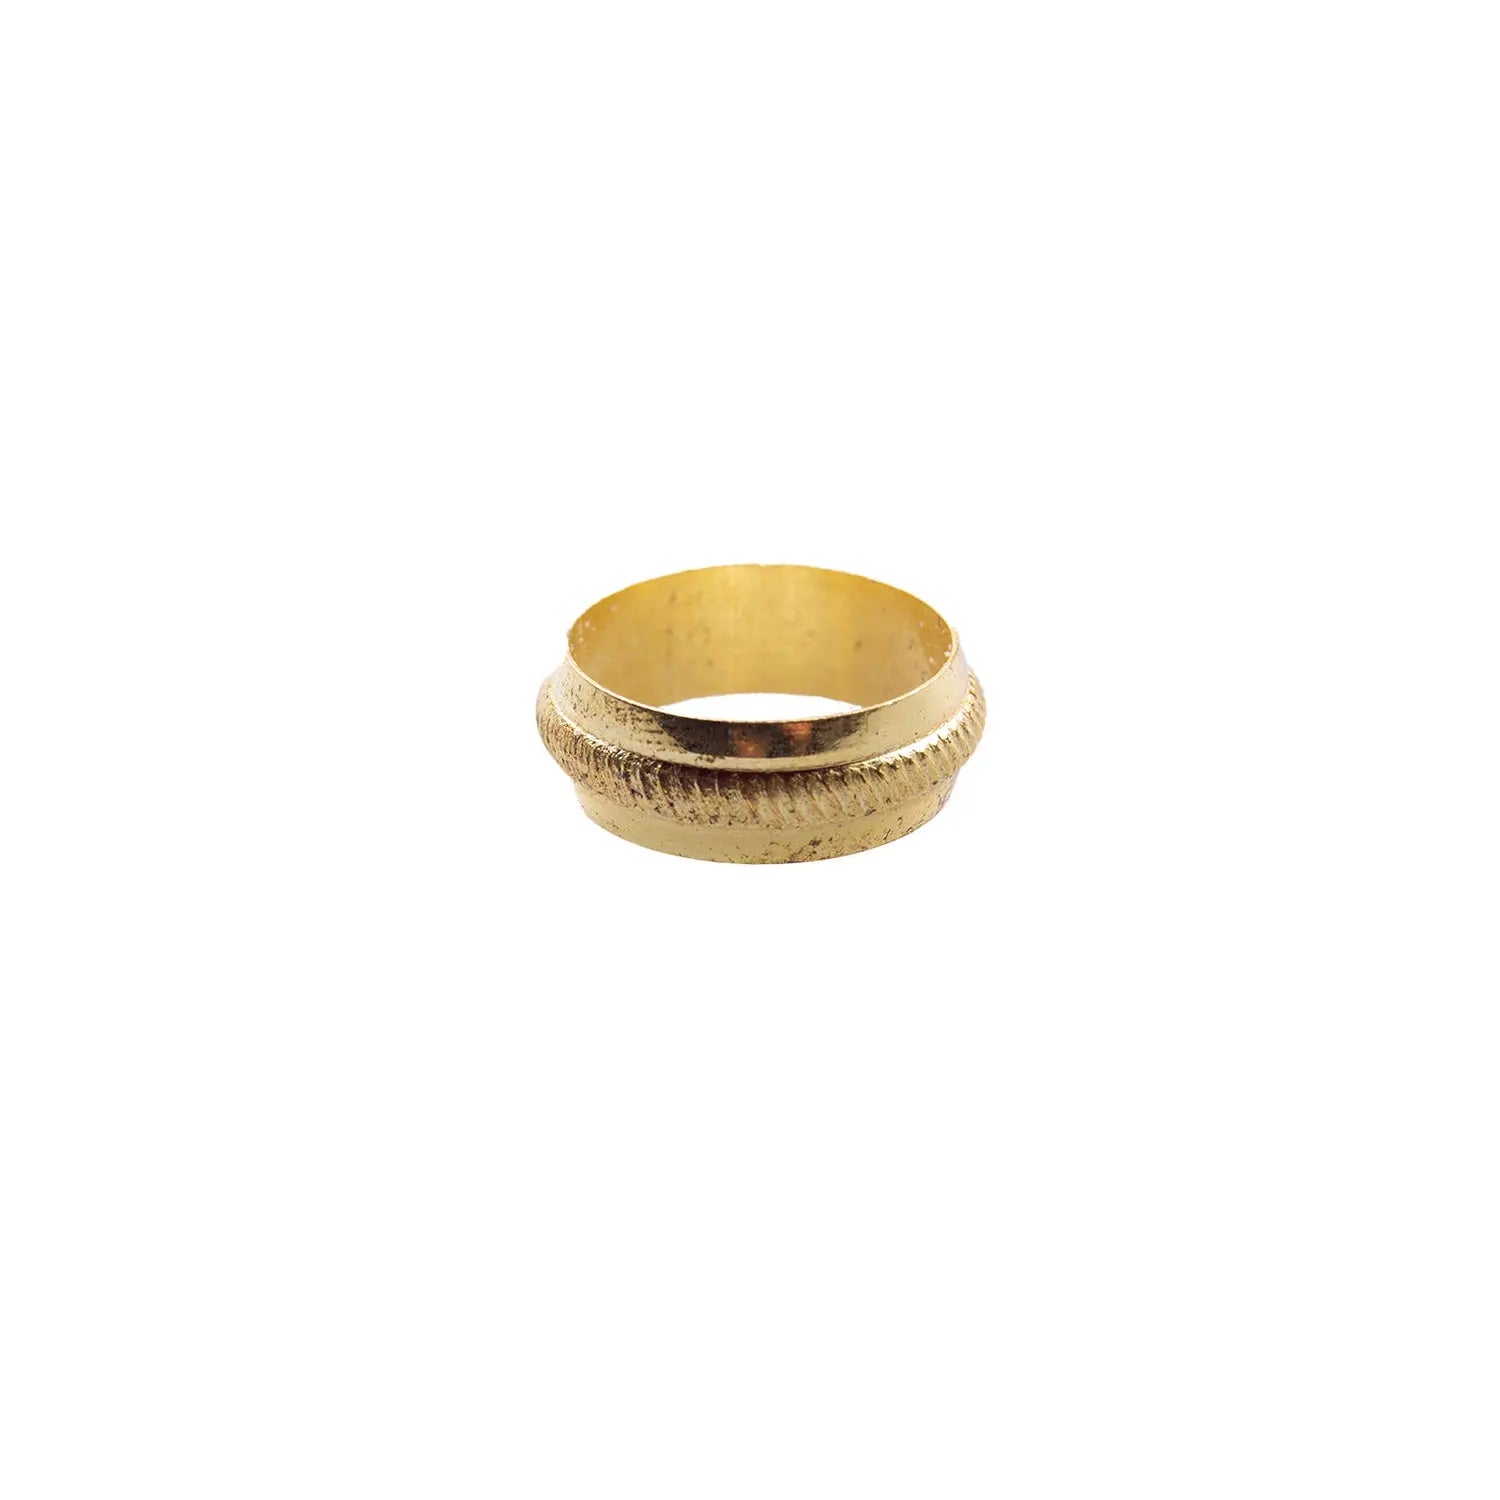 Busby Plume Ring Fitting for Royal Horse Artillery (RHA) Plumes wyedean